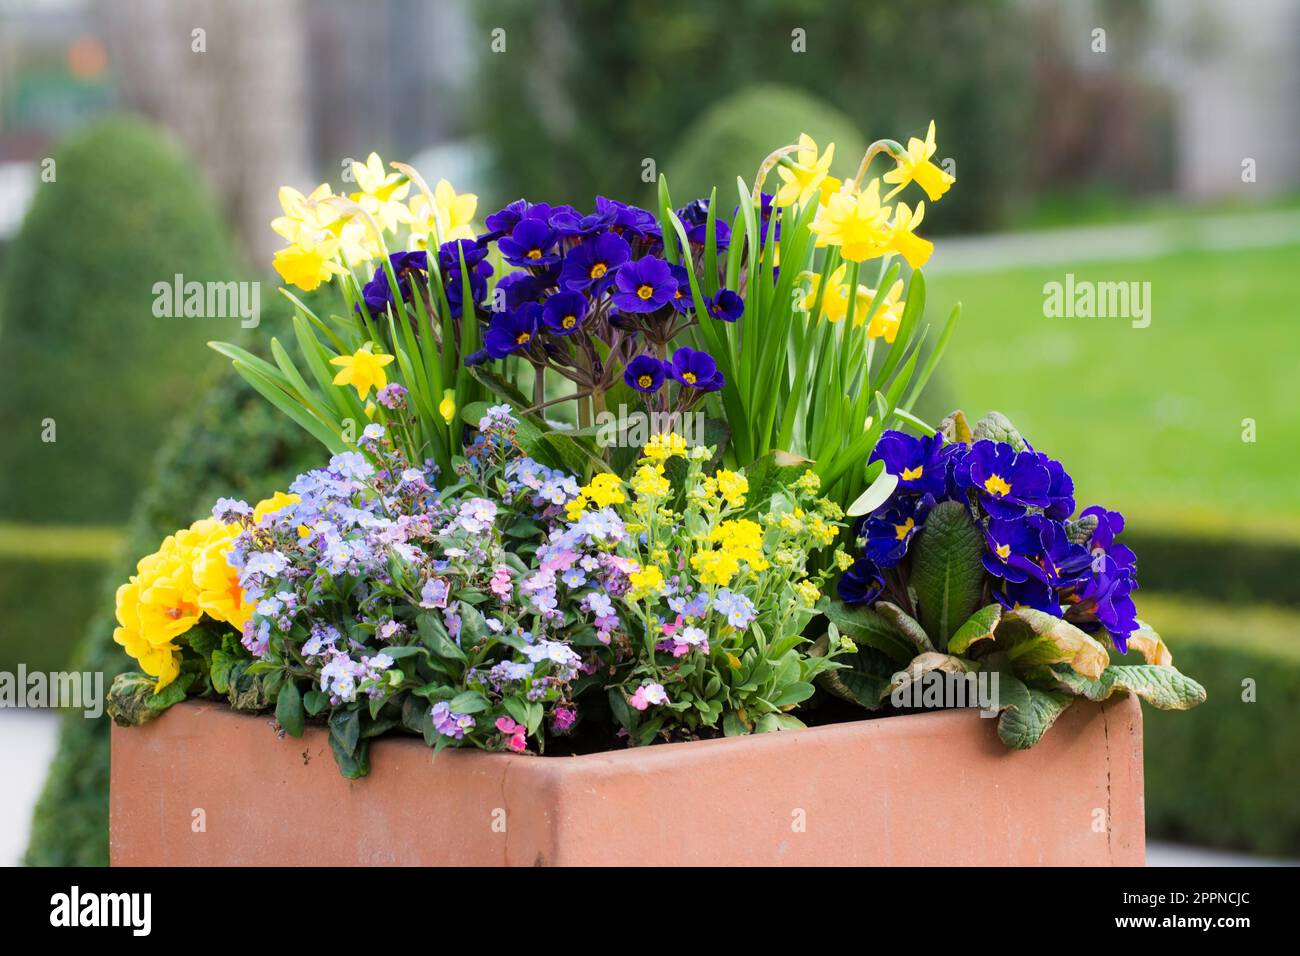 Rectangular flower pot in a park filled with pansies and daffodiles Stock Photo